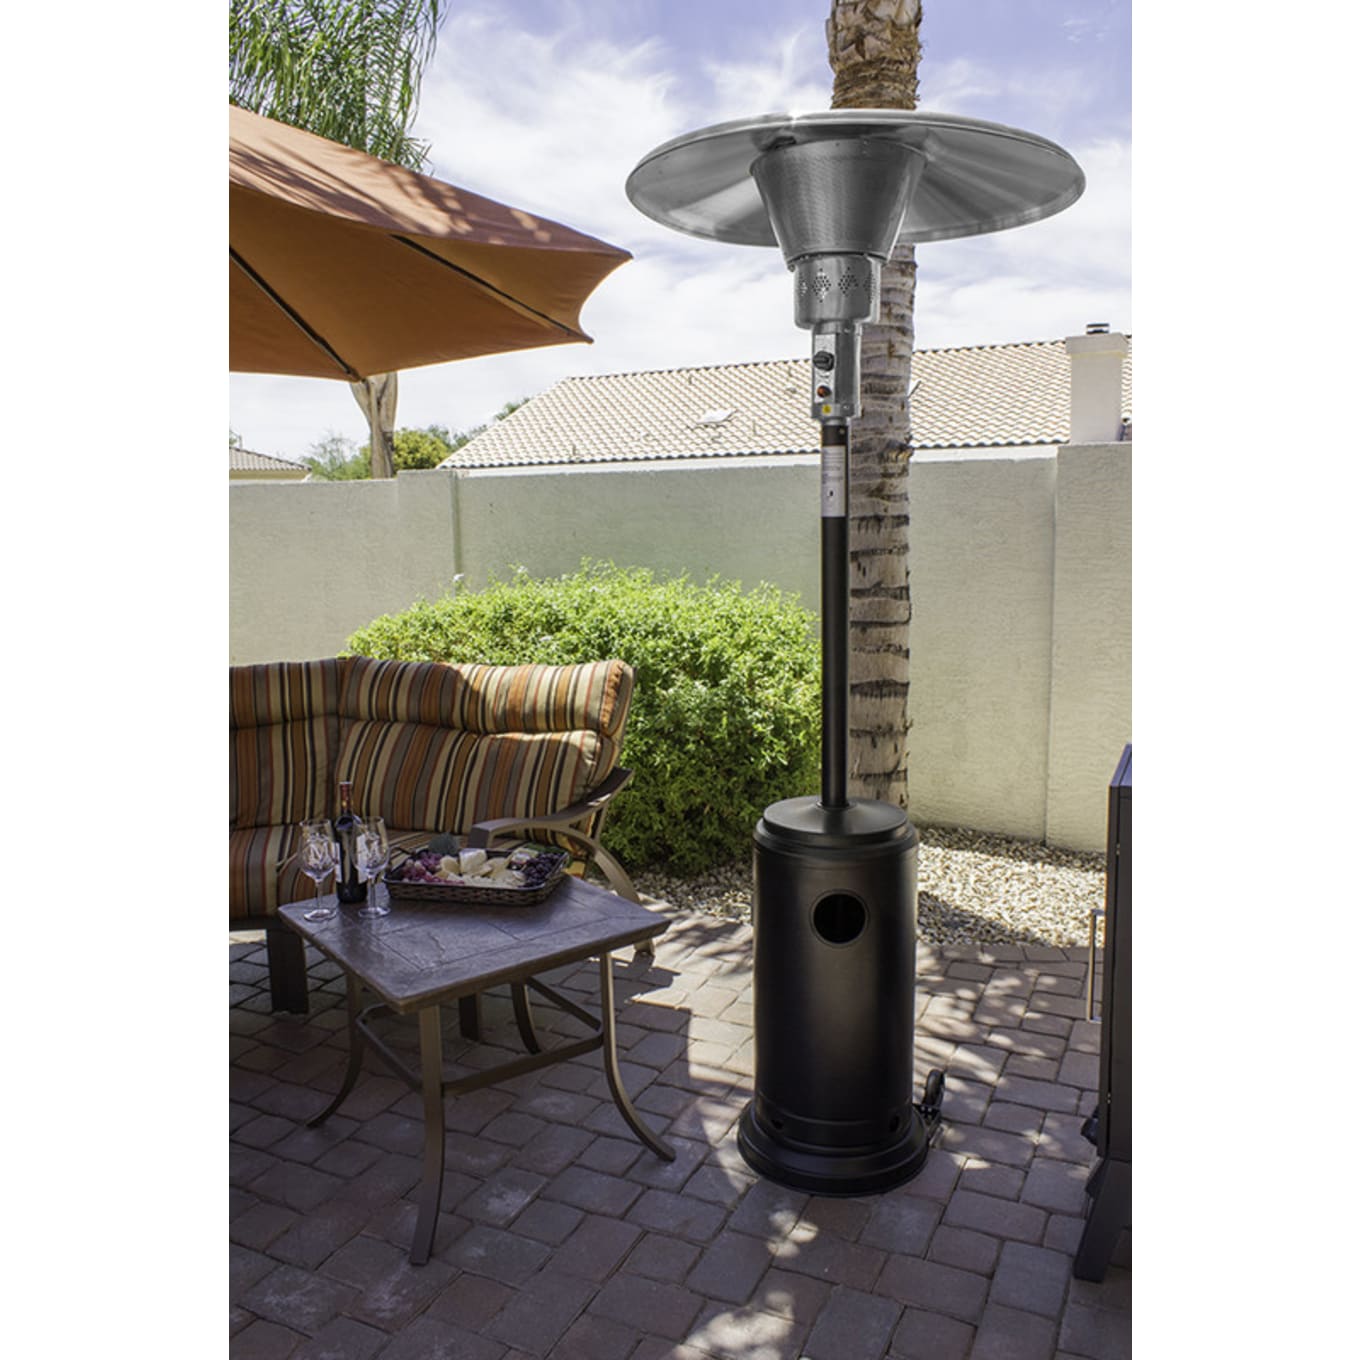 90" Tall Commercial Patio Heater in Bronze | BURN-2400-BRZ